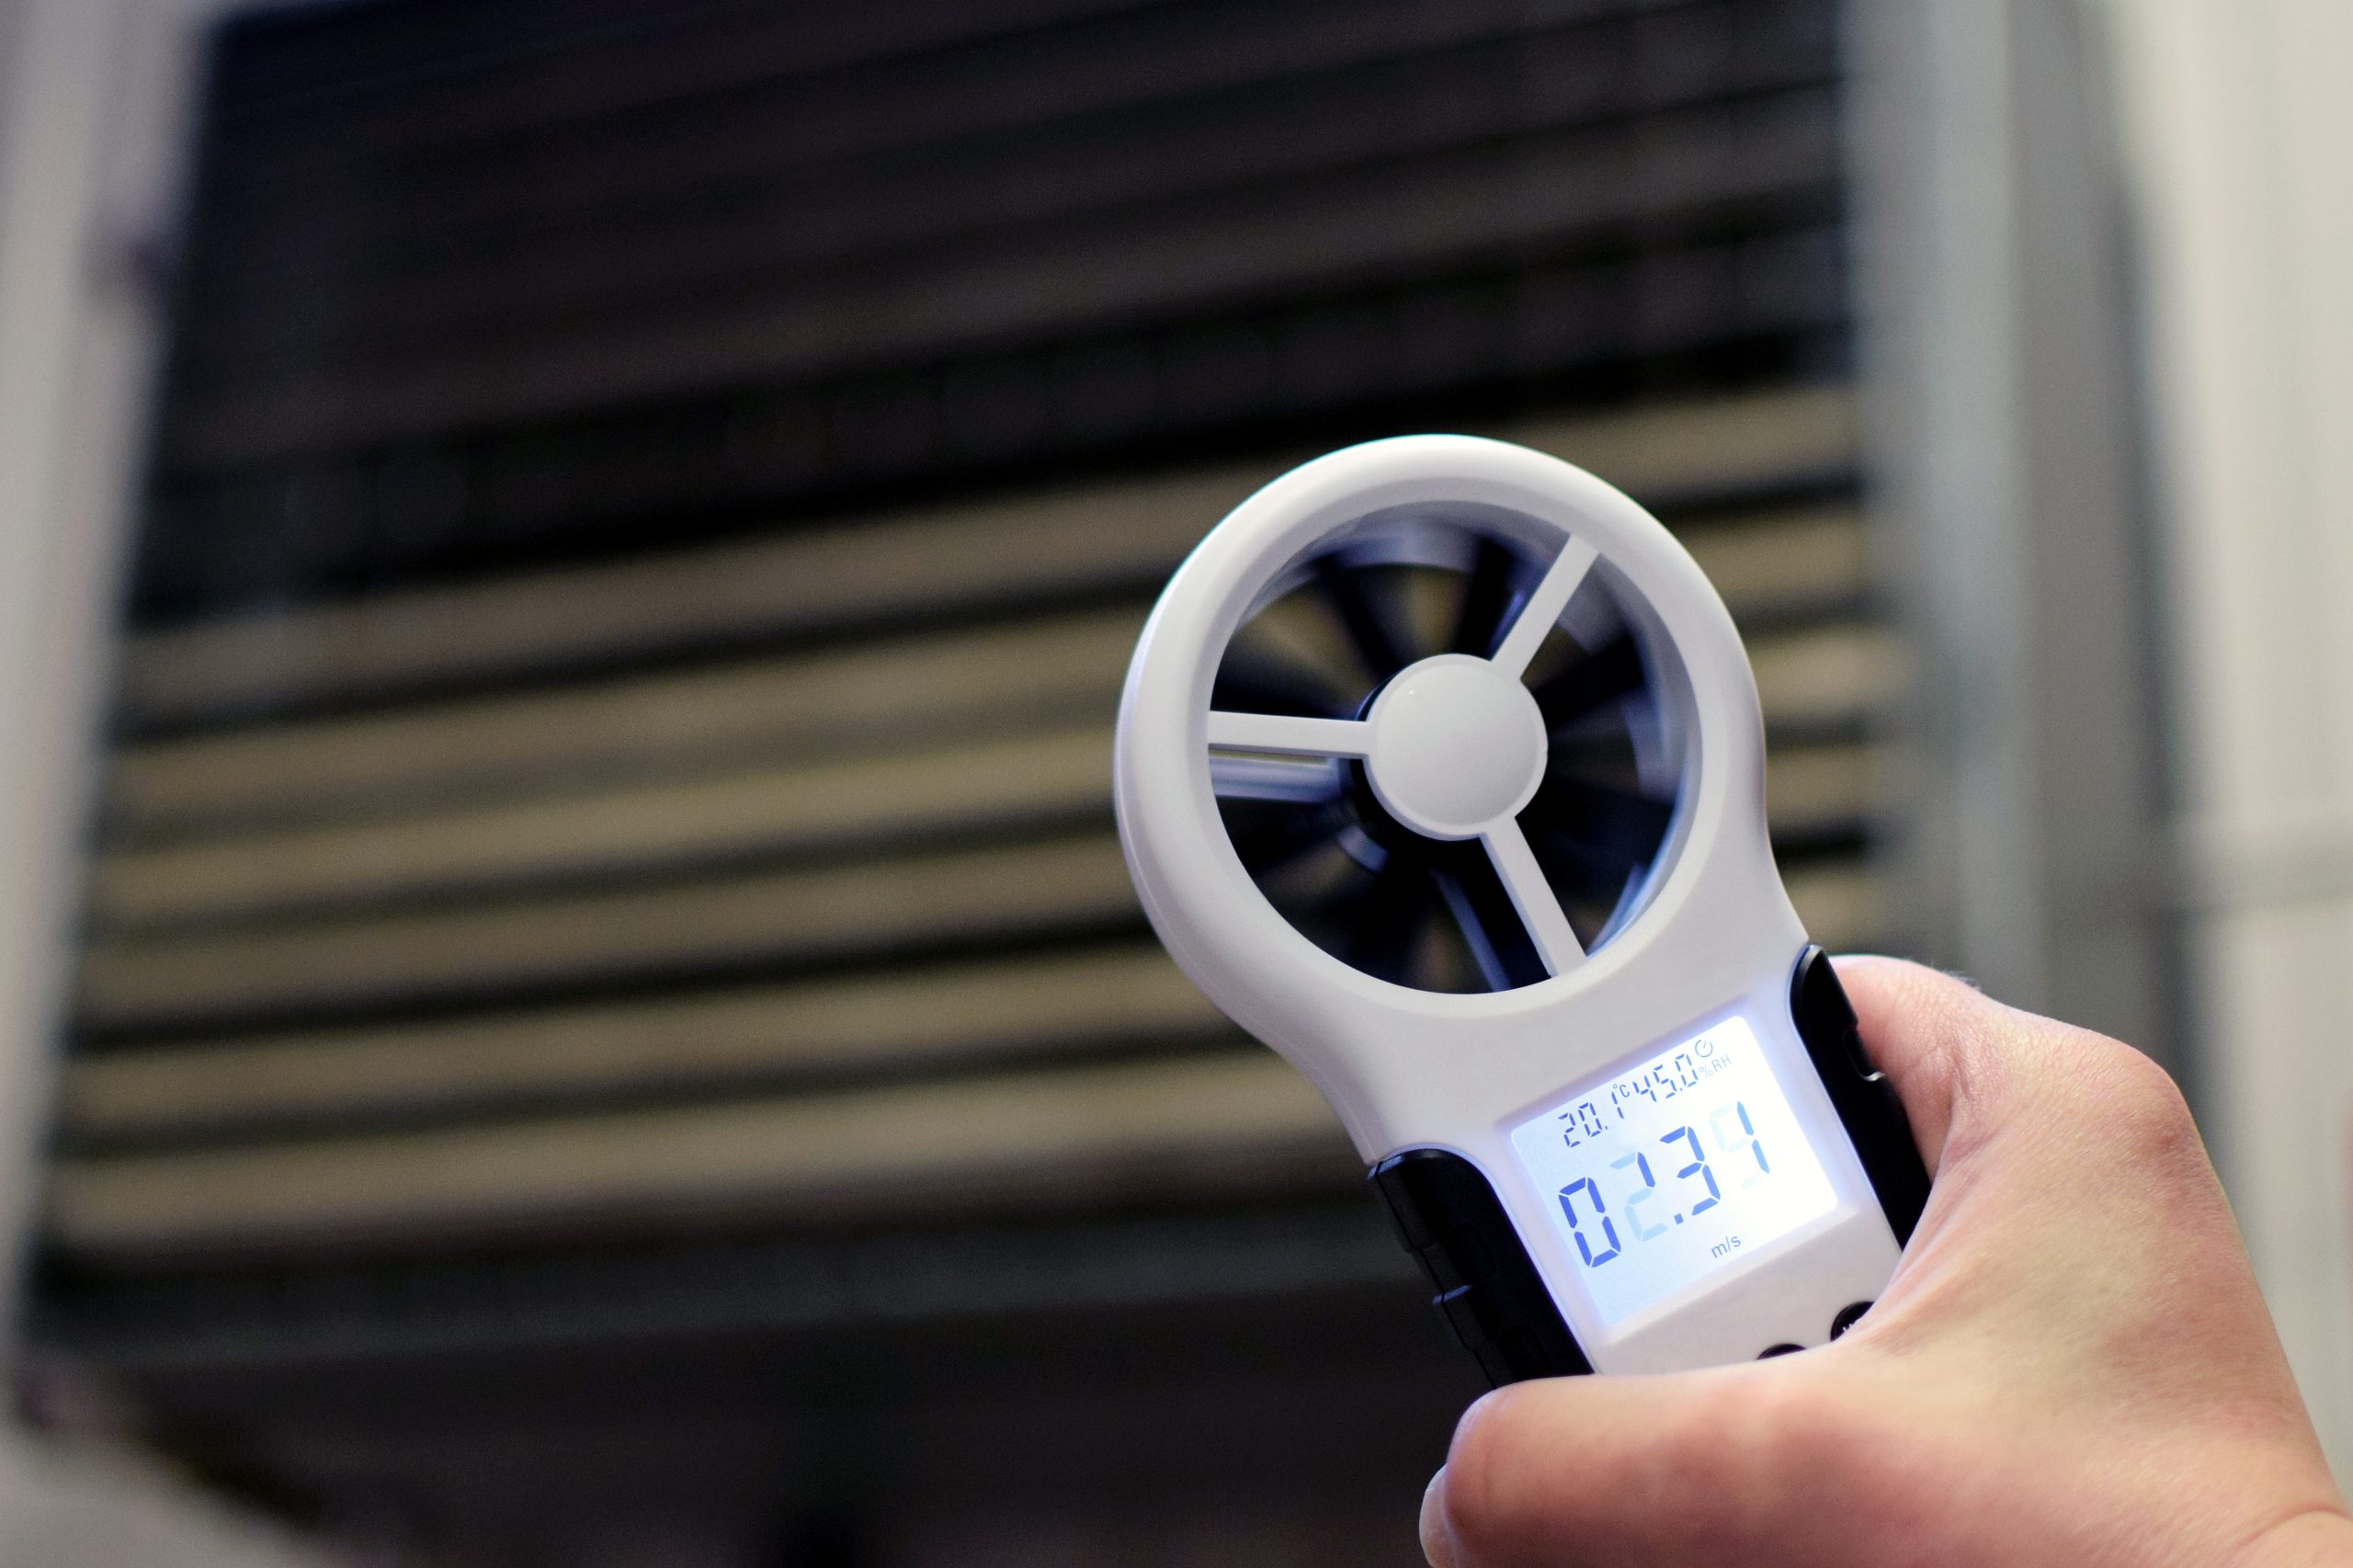 Hand-held anemometer measuring air flowing of ventilation louvre